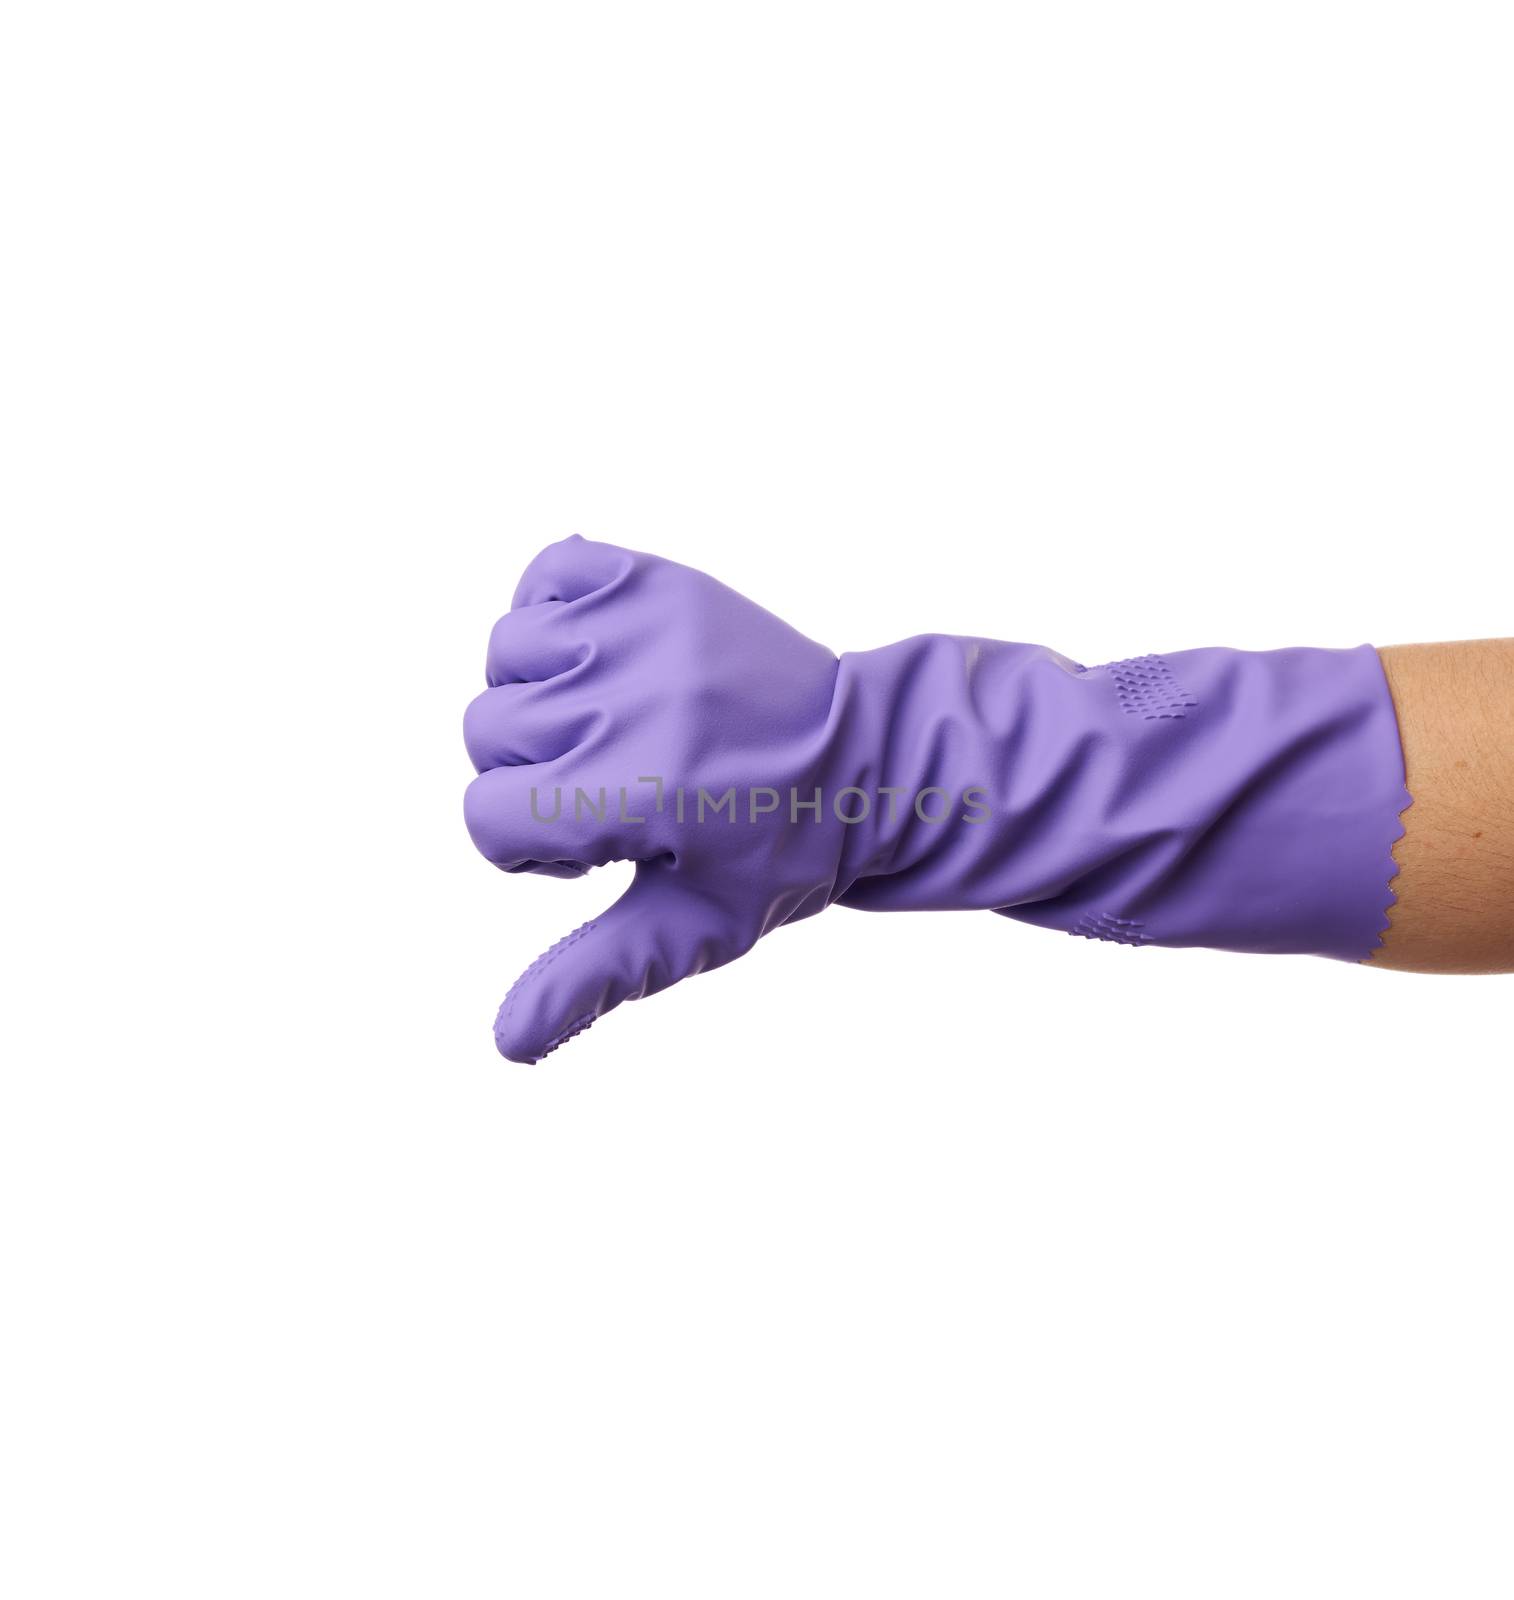 purple rubber glove for cleaning is dressed on the hand, protection of the hands from chemicals, isolated white background, dislike symbol